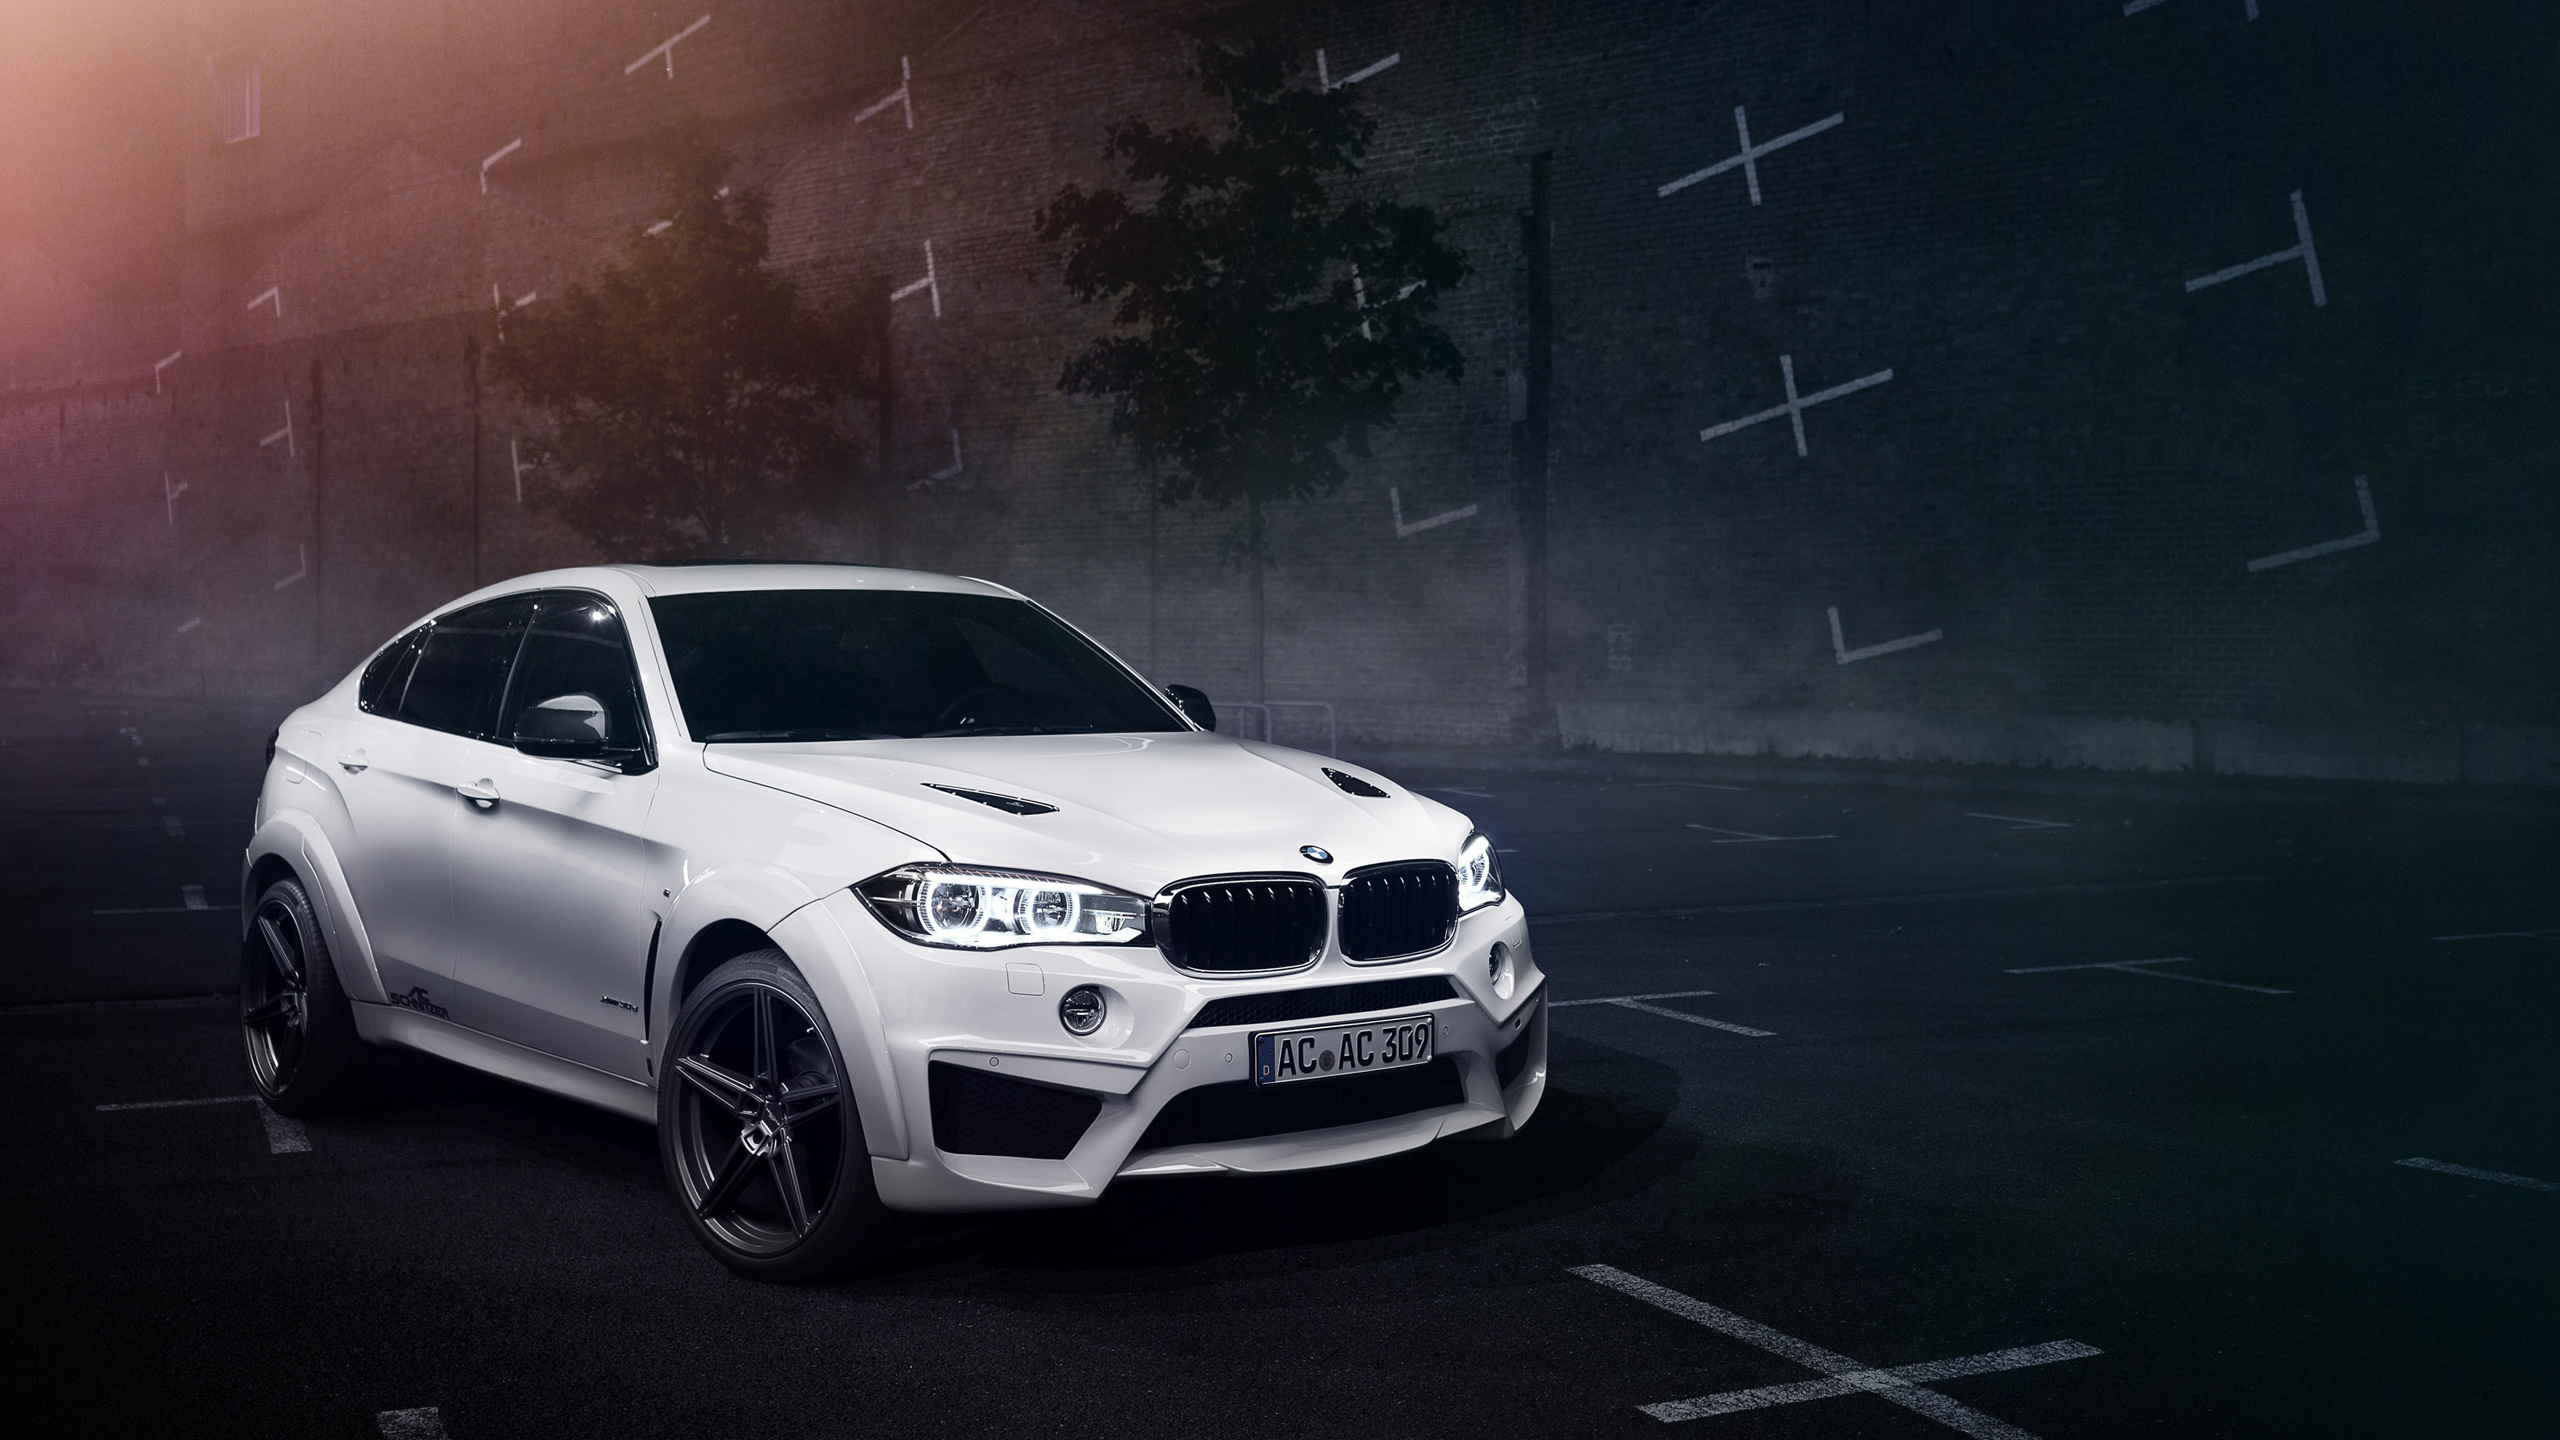 Gallery For Gt Bmw X6 M Wallpaper HD